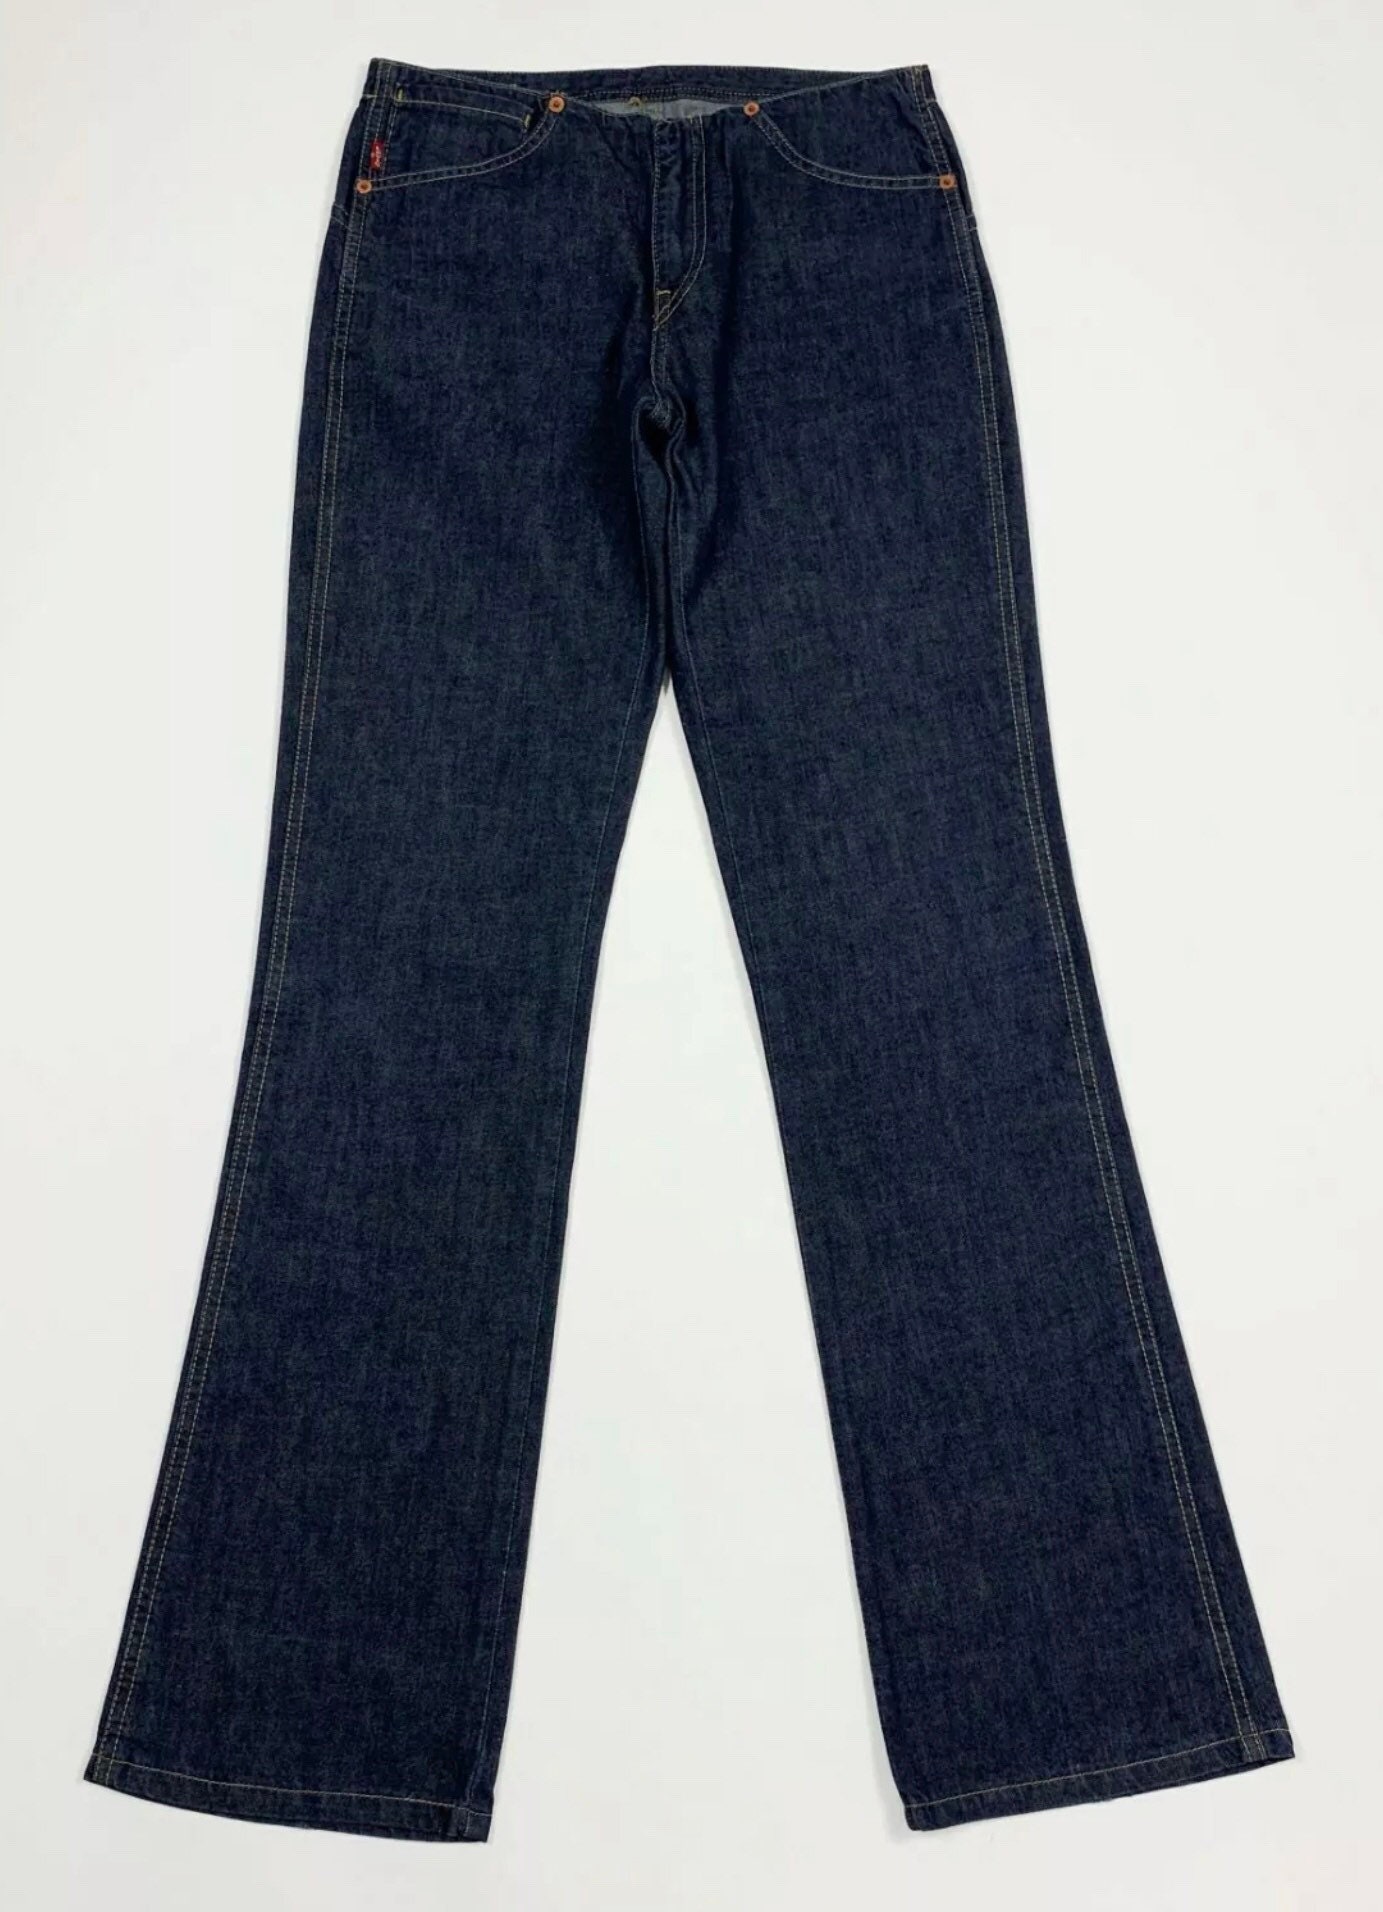 Levis 565 W28 L32 Tg 42 Jeans Woman Used Square Cut Bootcut - Etsy Ireland